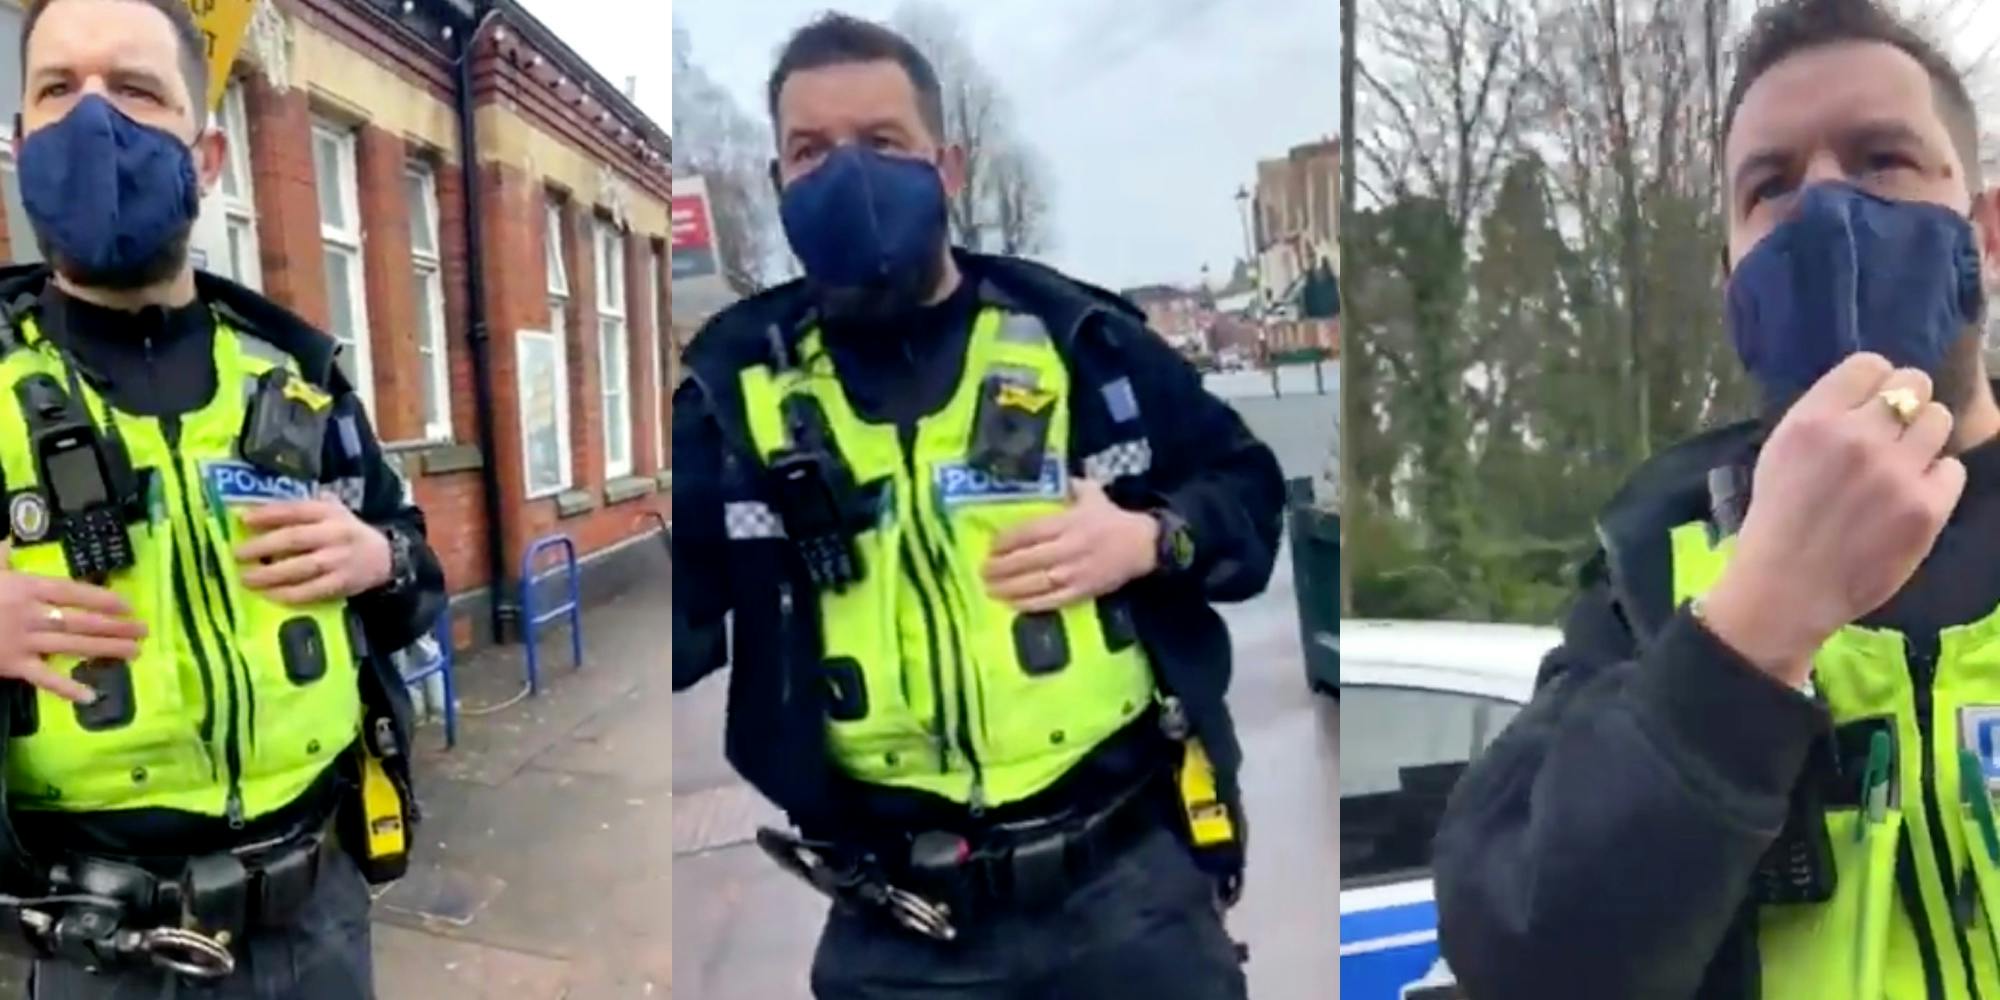 Video shows U.K. police detaining man who wouldn't say his name.